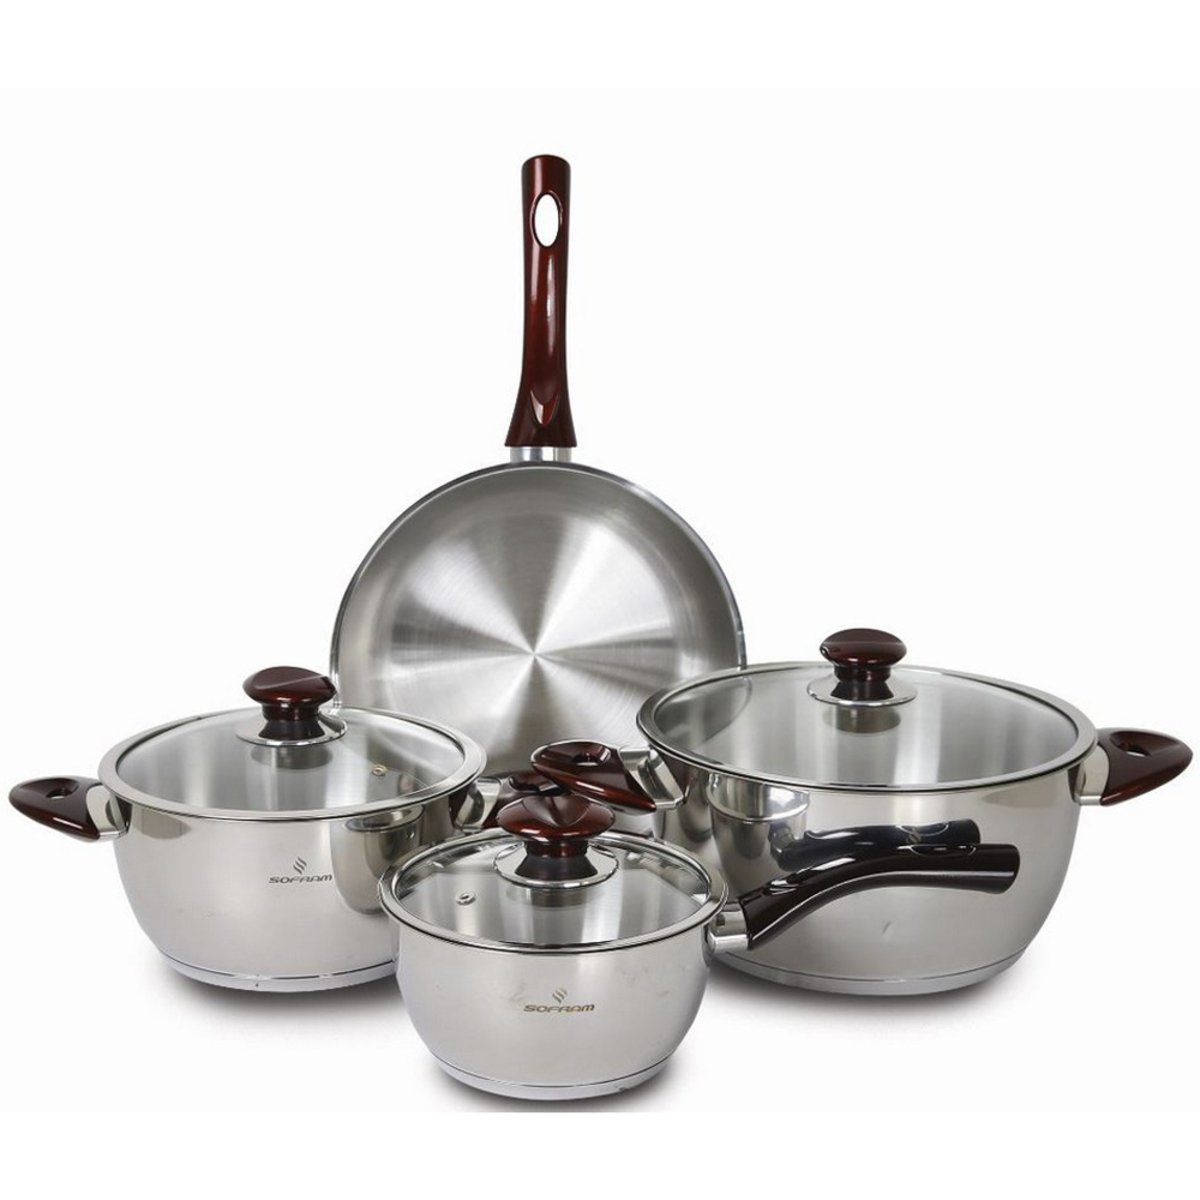 Sofram Stainless Steel Cookware Set 7pcs